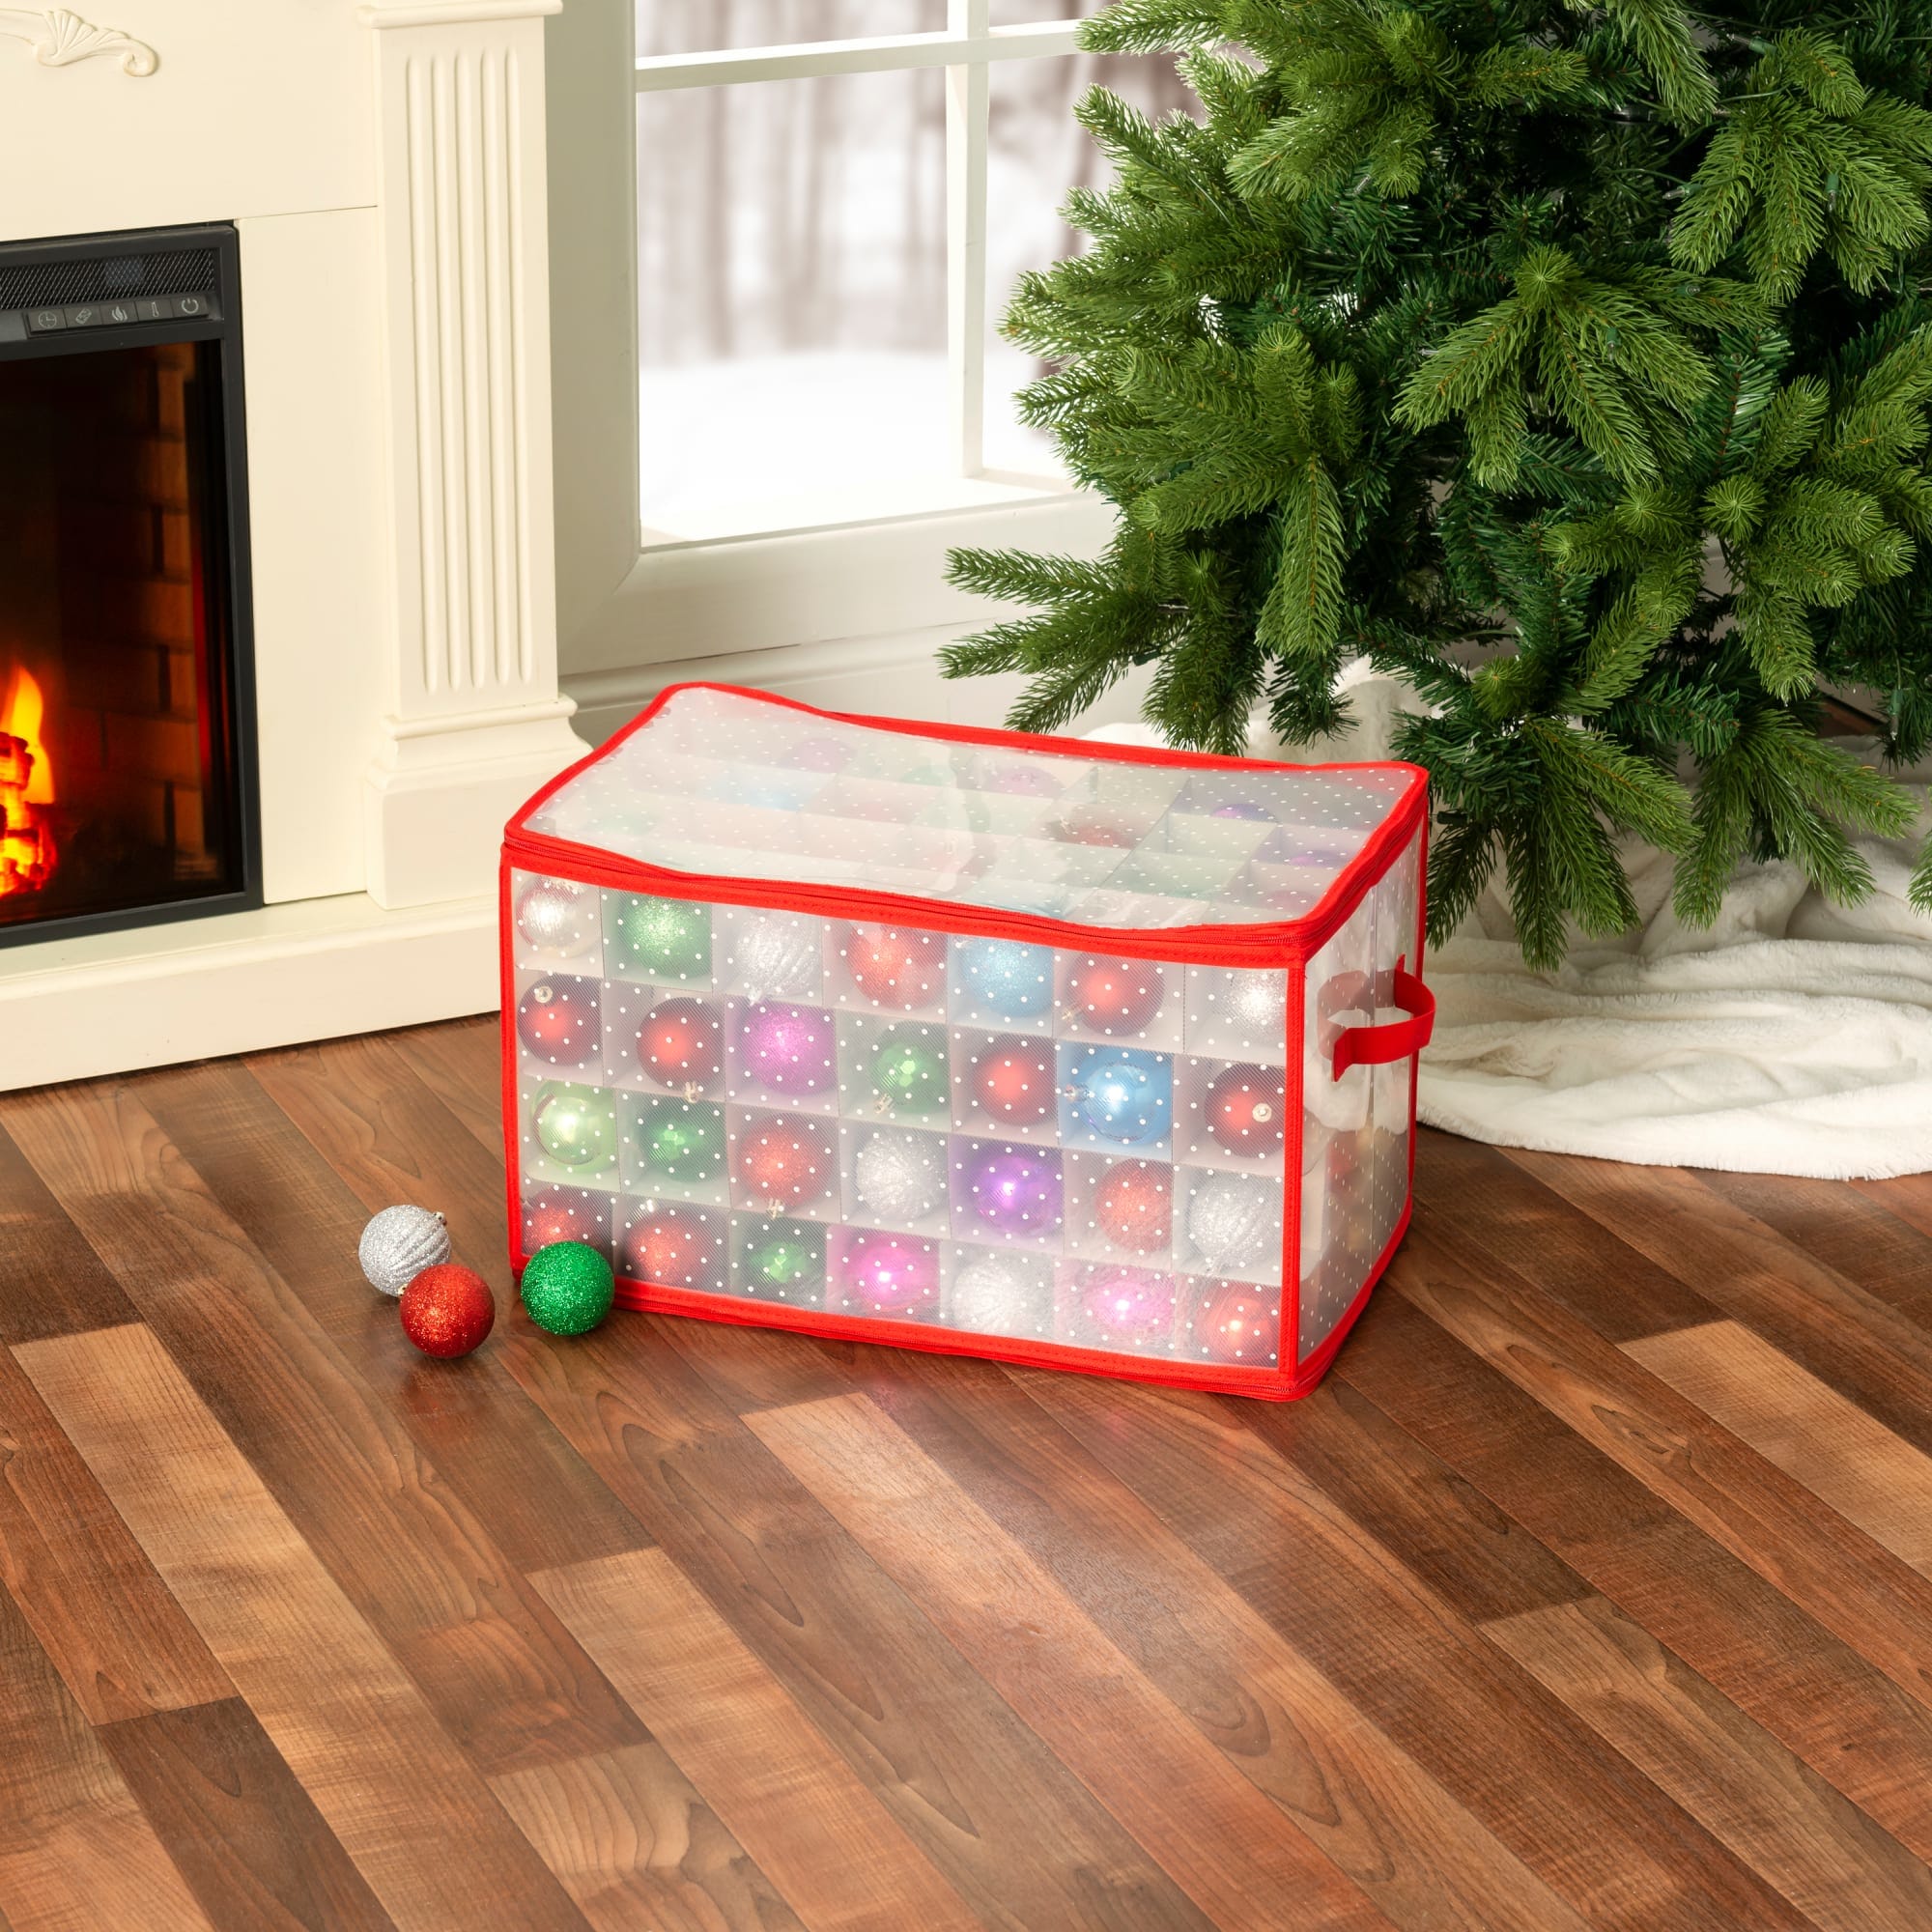 Home Basics Zippered 112 Ornament Storage Box, Red $10.00 EACH, CASE PACK OF 12